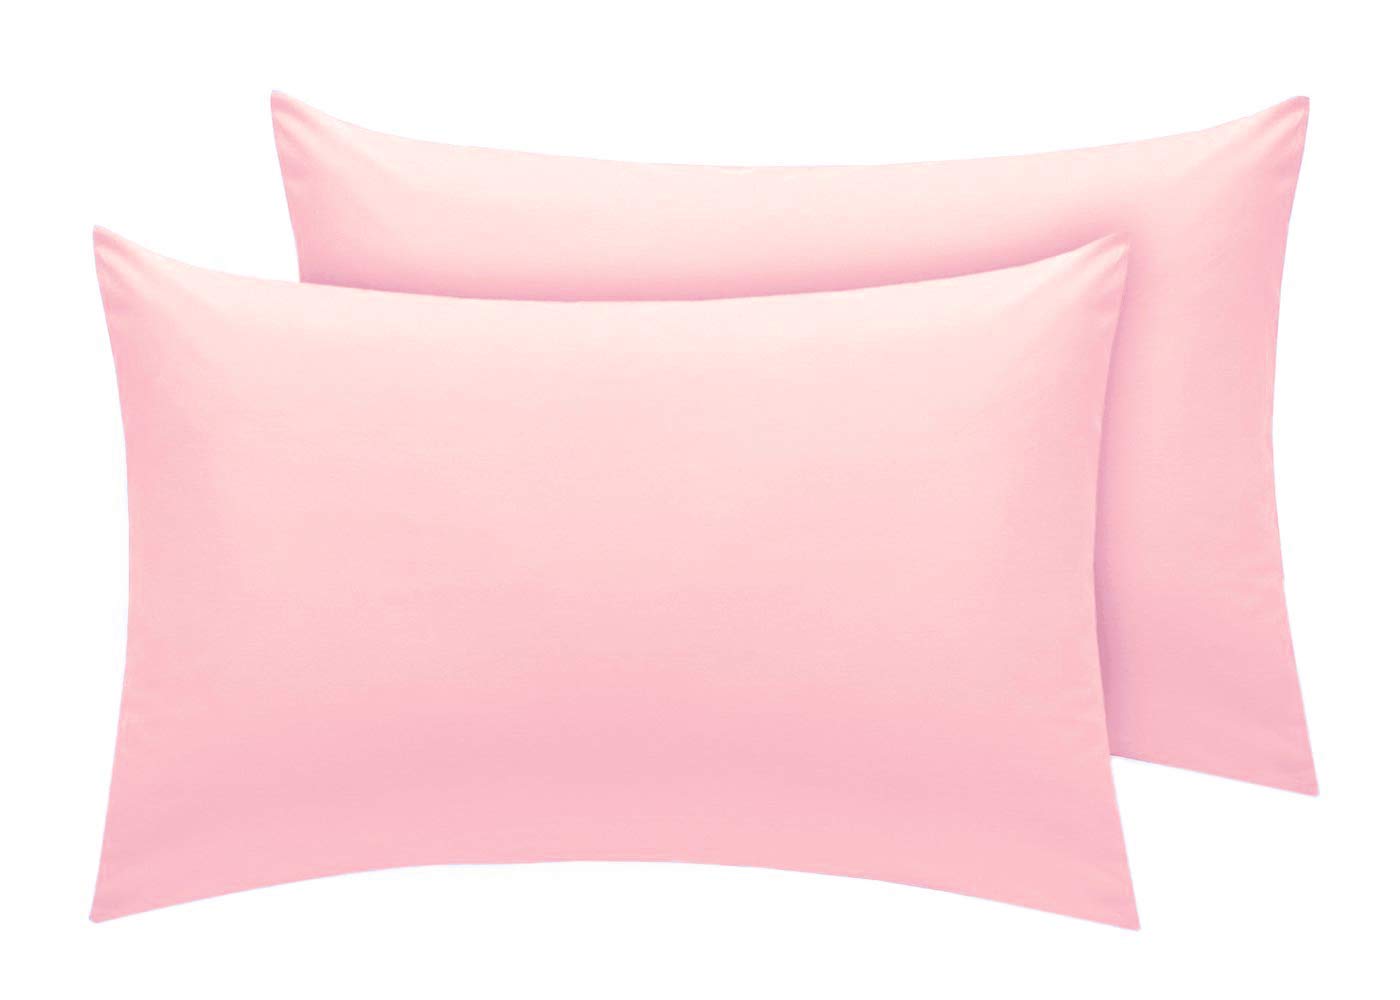 British Home Bedding Pillow Cases Pack of 2 Plain Cover Polycotton Bedroom Luxury Pair Pack (Pink, Housewife Pillow Cases)